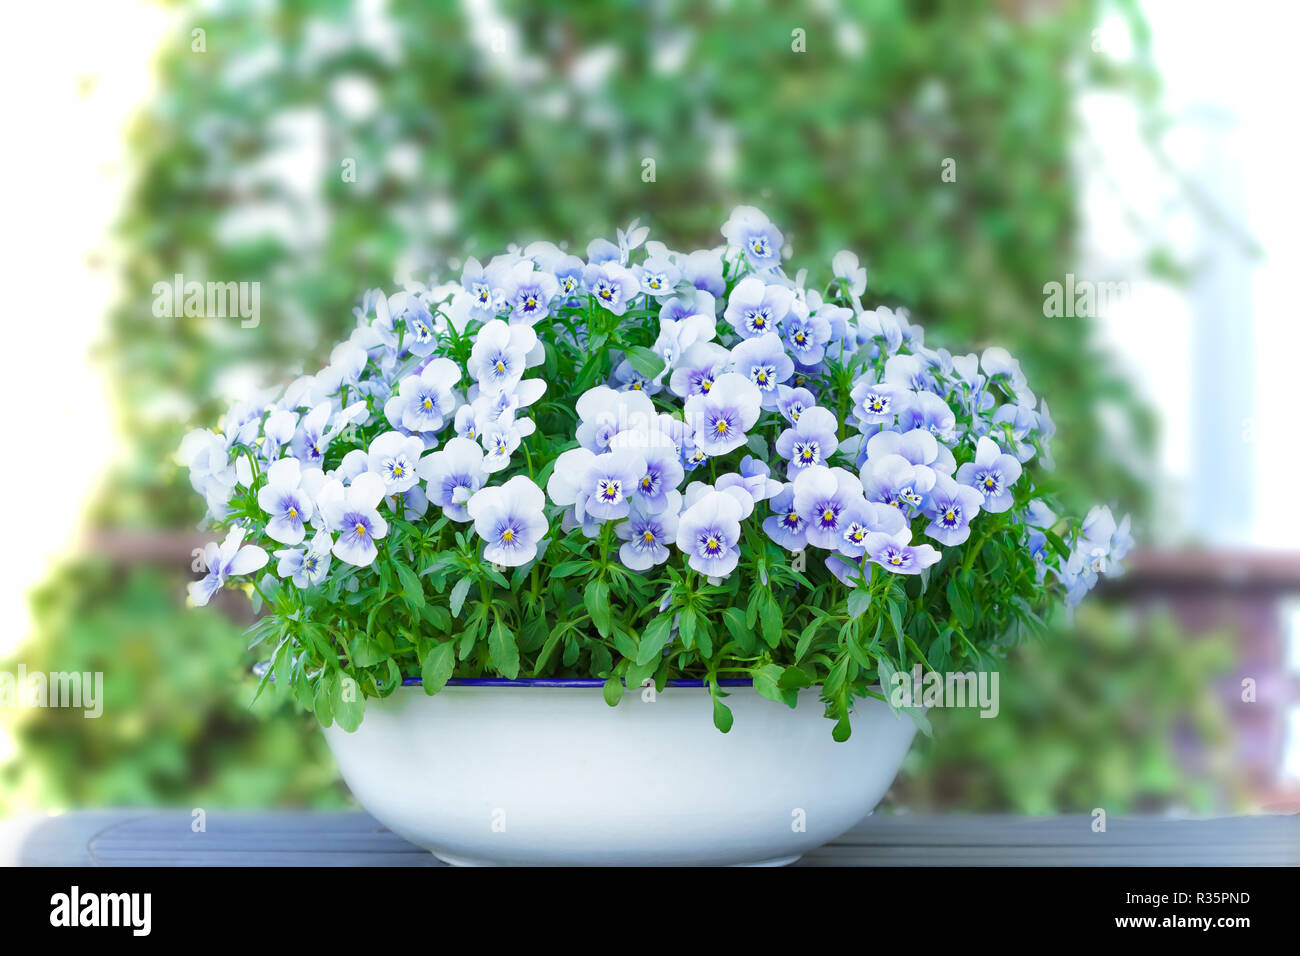 Pansy flowers in shades of lilac, violet and blue in a white vintage wash basin or pot on a balcony table, copy or text space Stock Photo